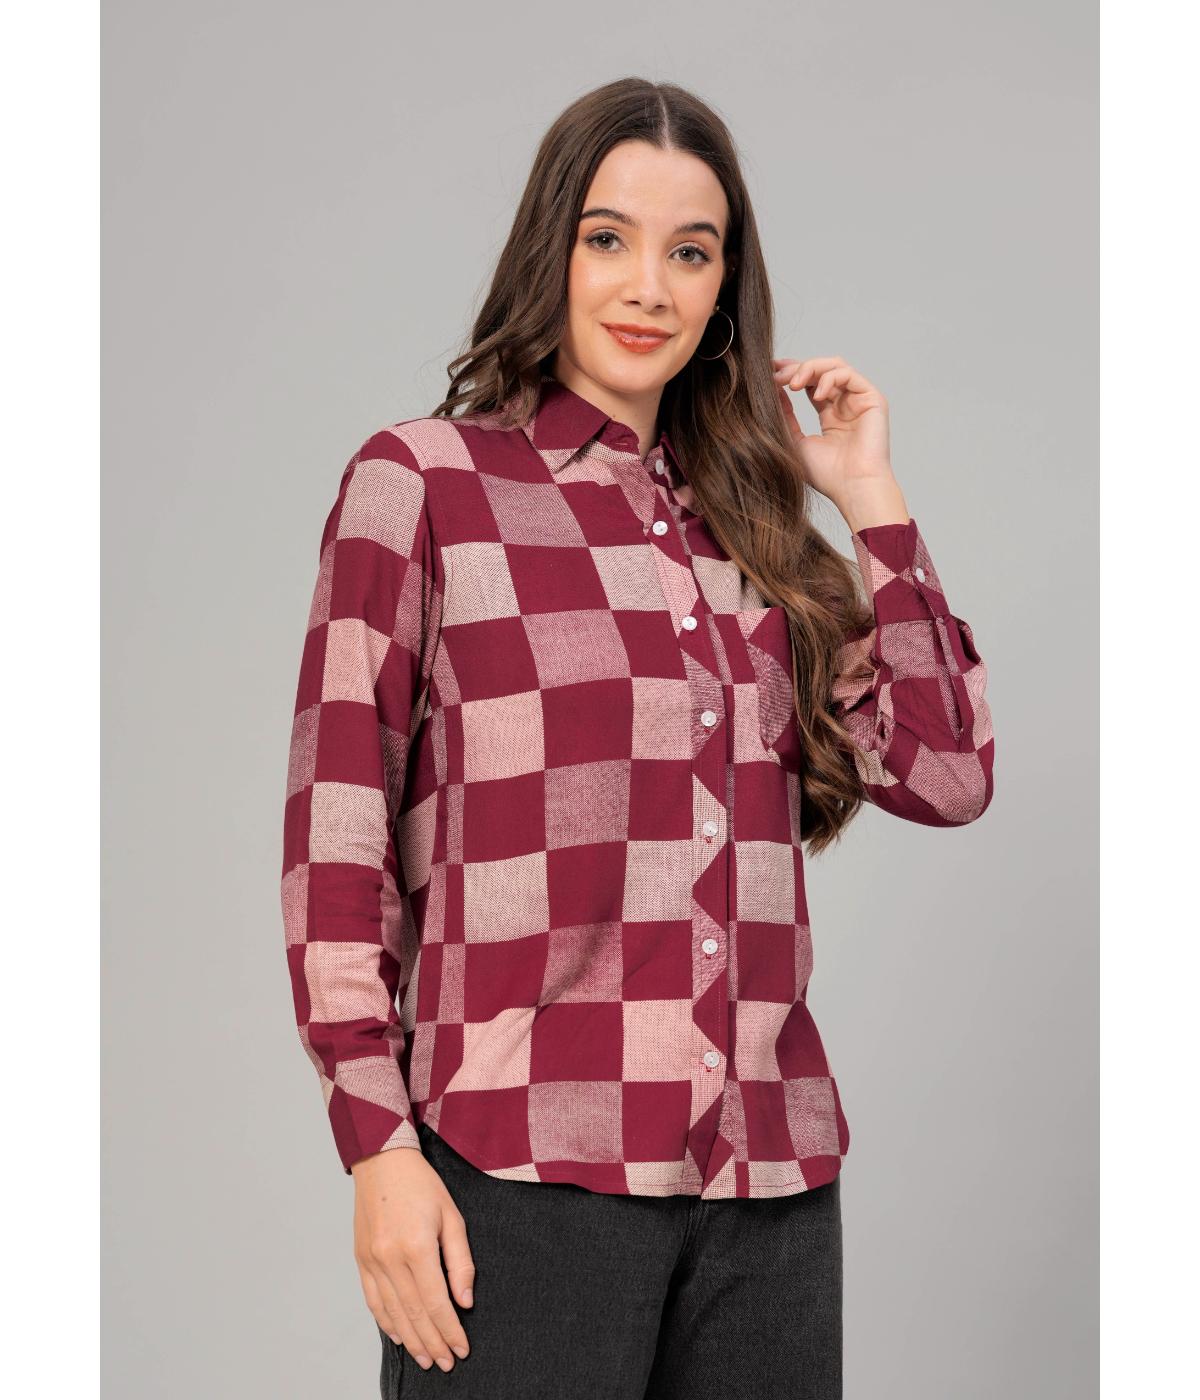 Daevish New Rayon Checkered Printed Regular Fit Spread Collor Casual Shirt for Women & Girl's